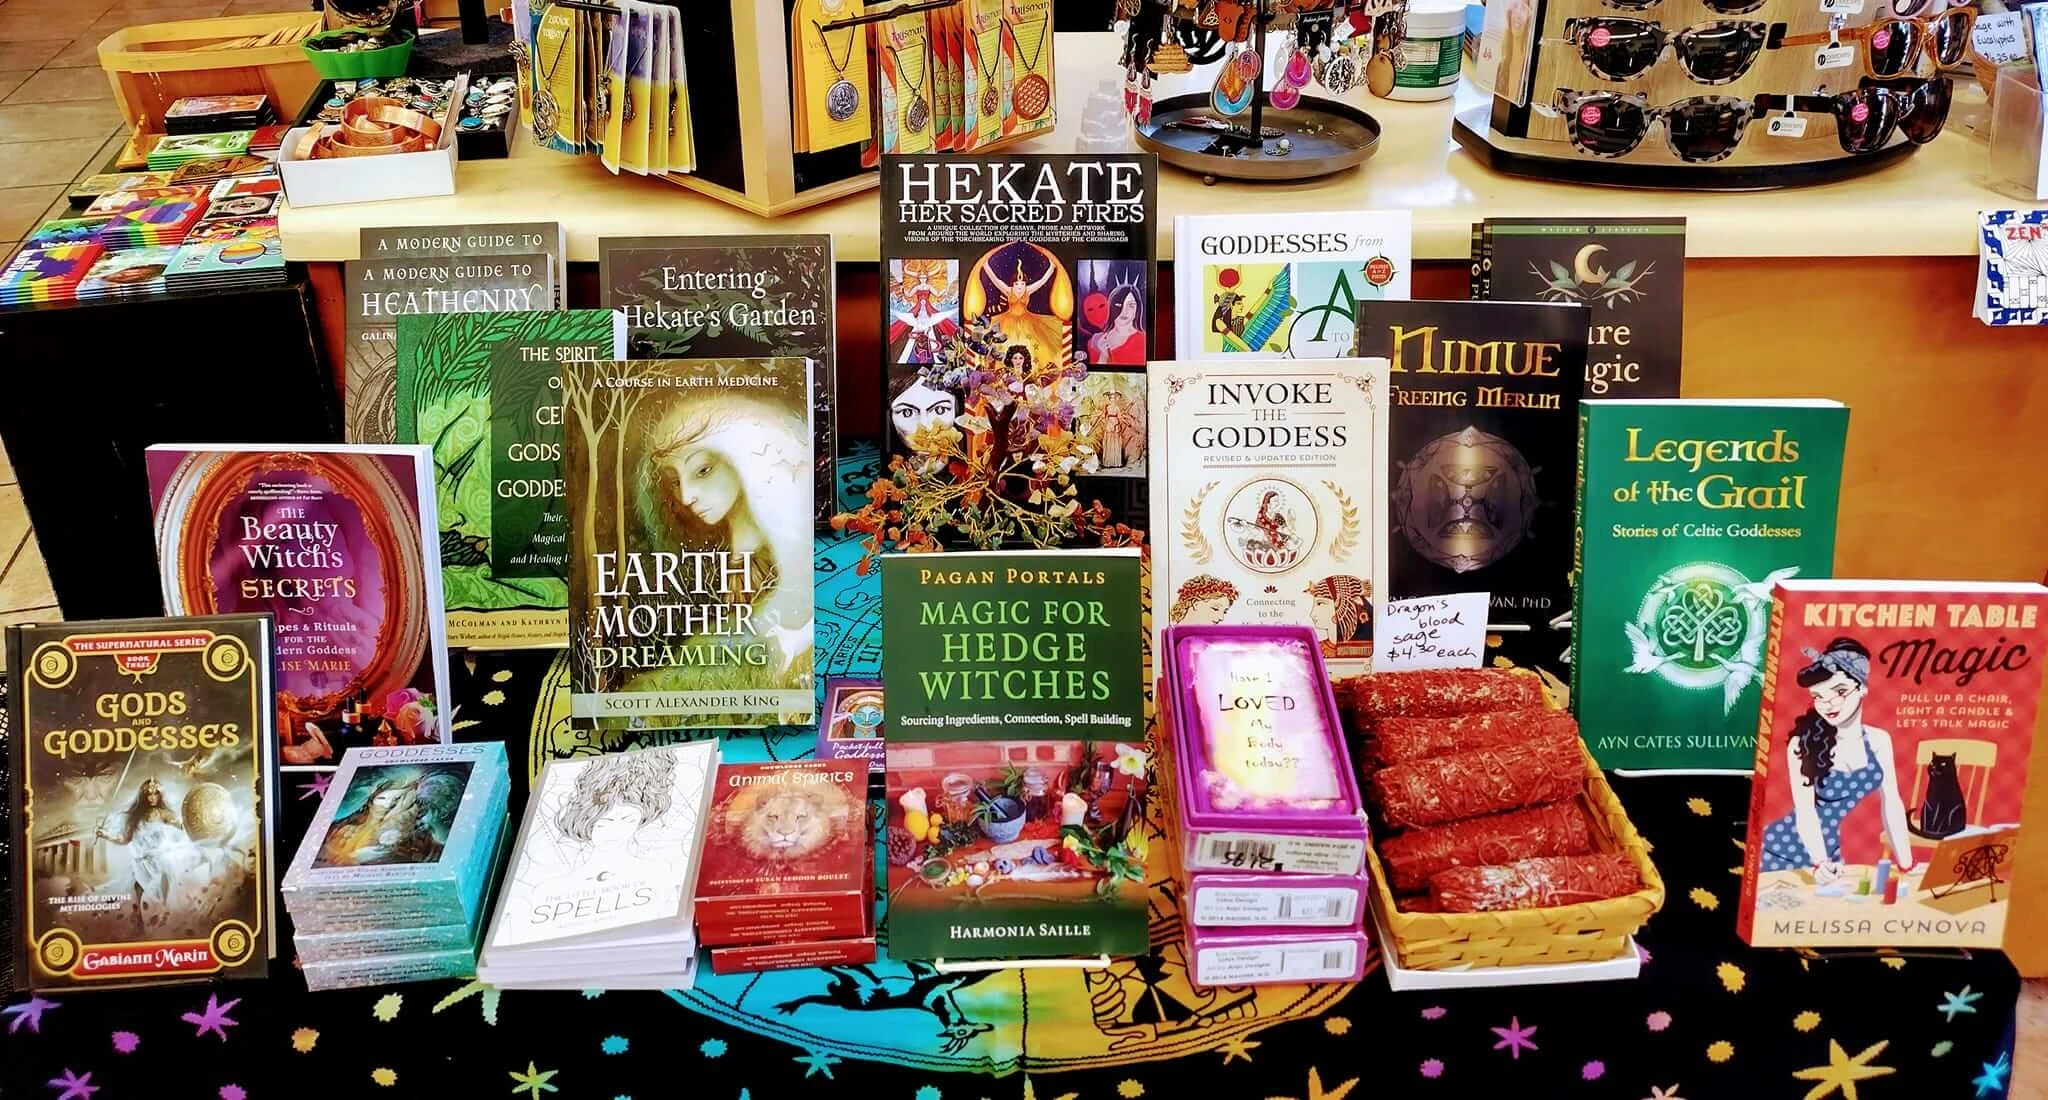 An array of books and journals about goddesses